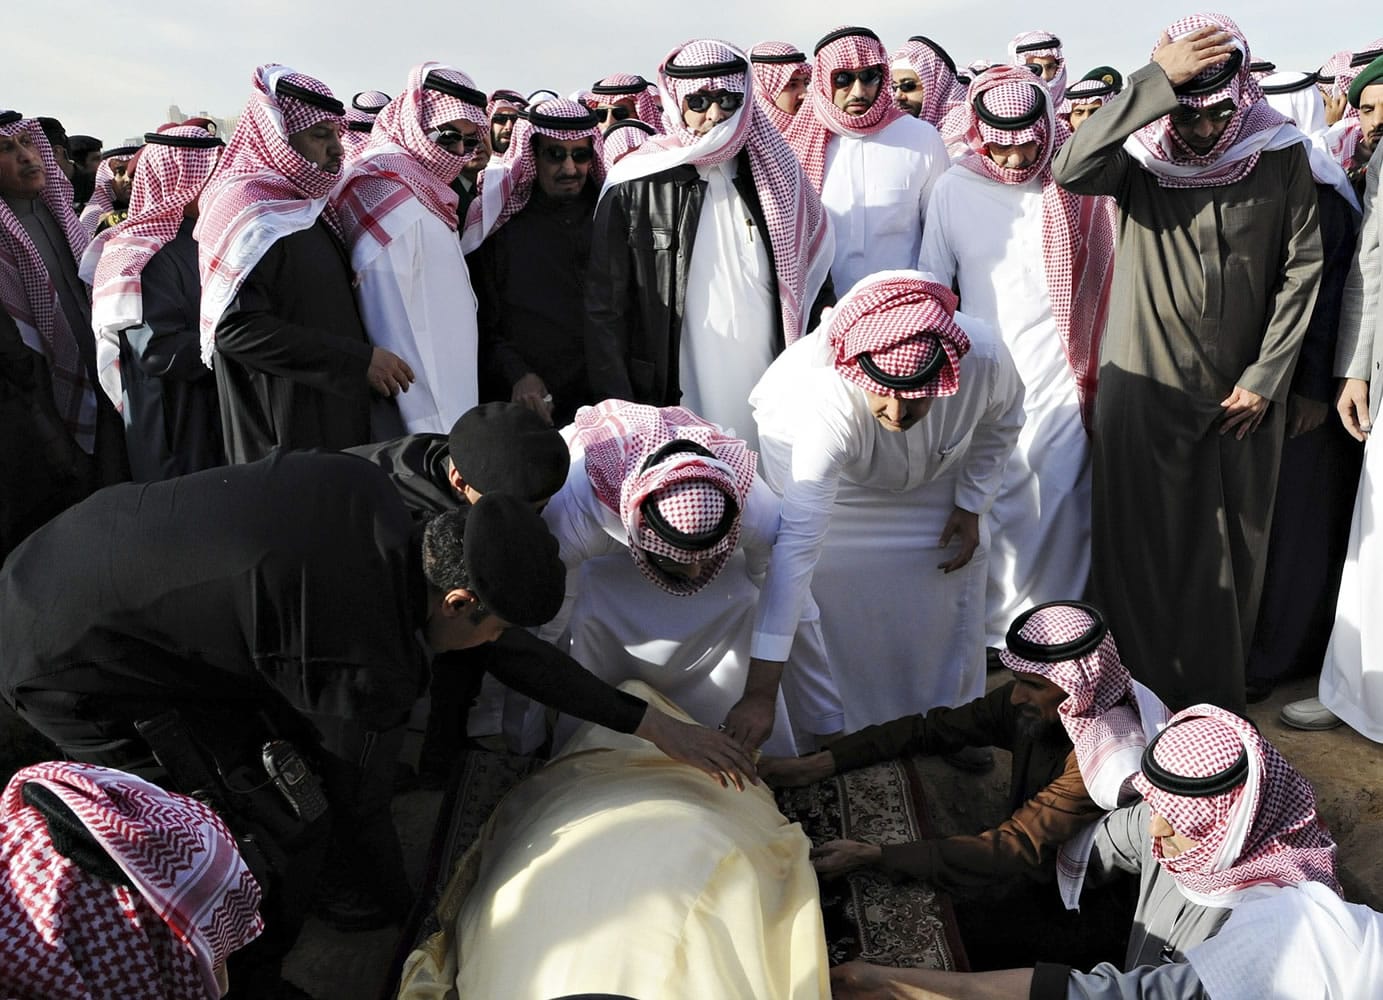 Mourners who carried the body of late King Abdullah put him down before his burial Friday at al-Oud cemetery in Riyadh, Saudi Arabia.